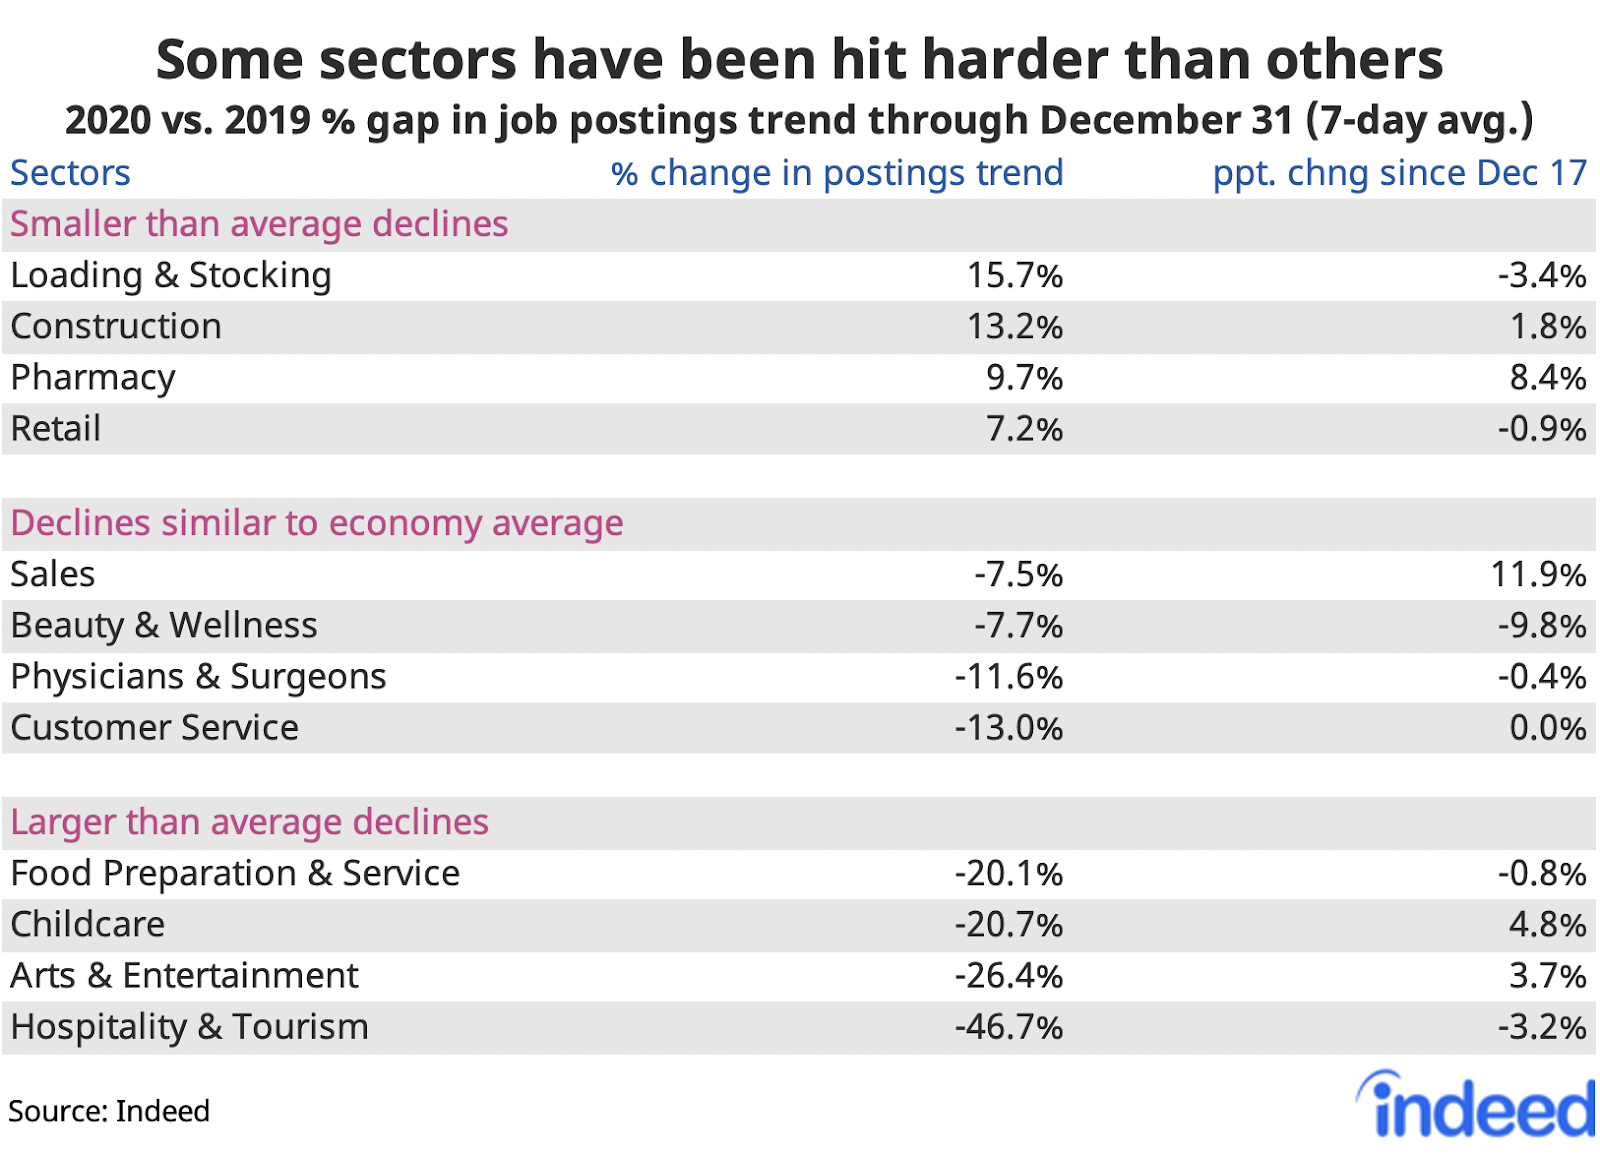 Table showing industries that have been hit hardest COVID 19